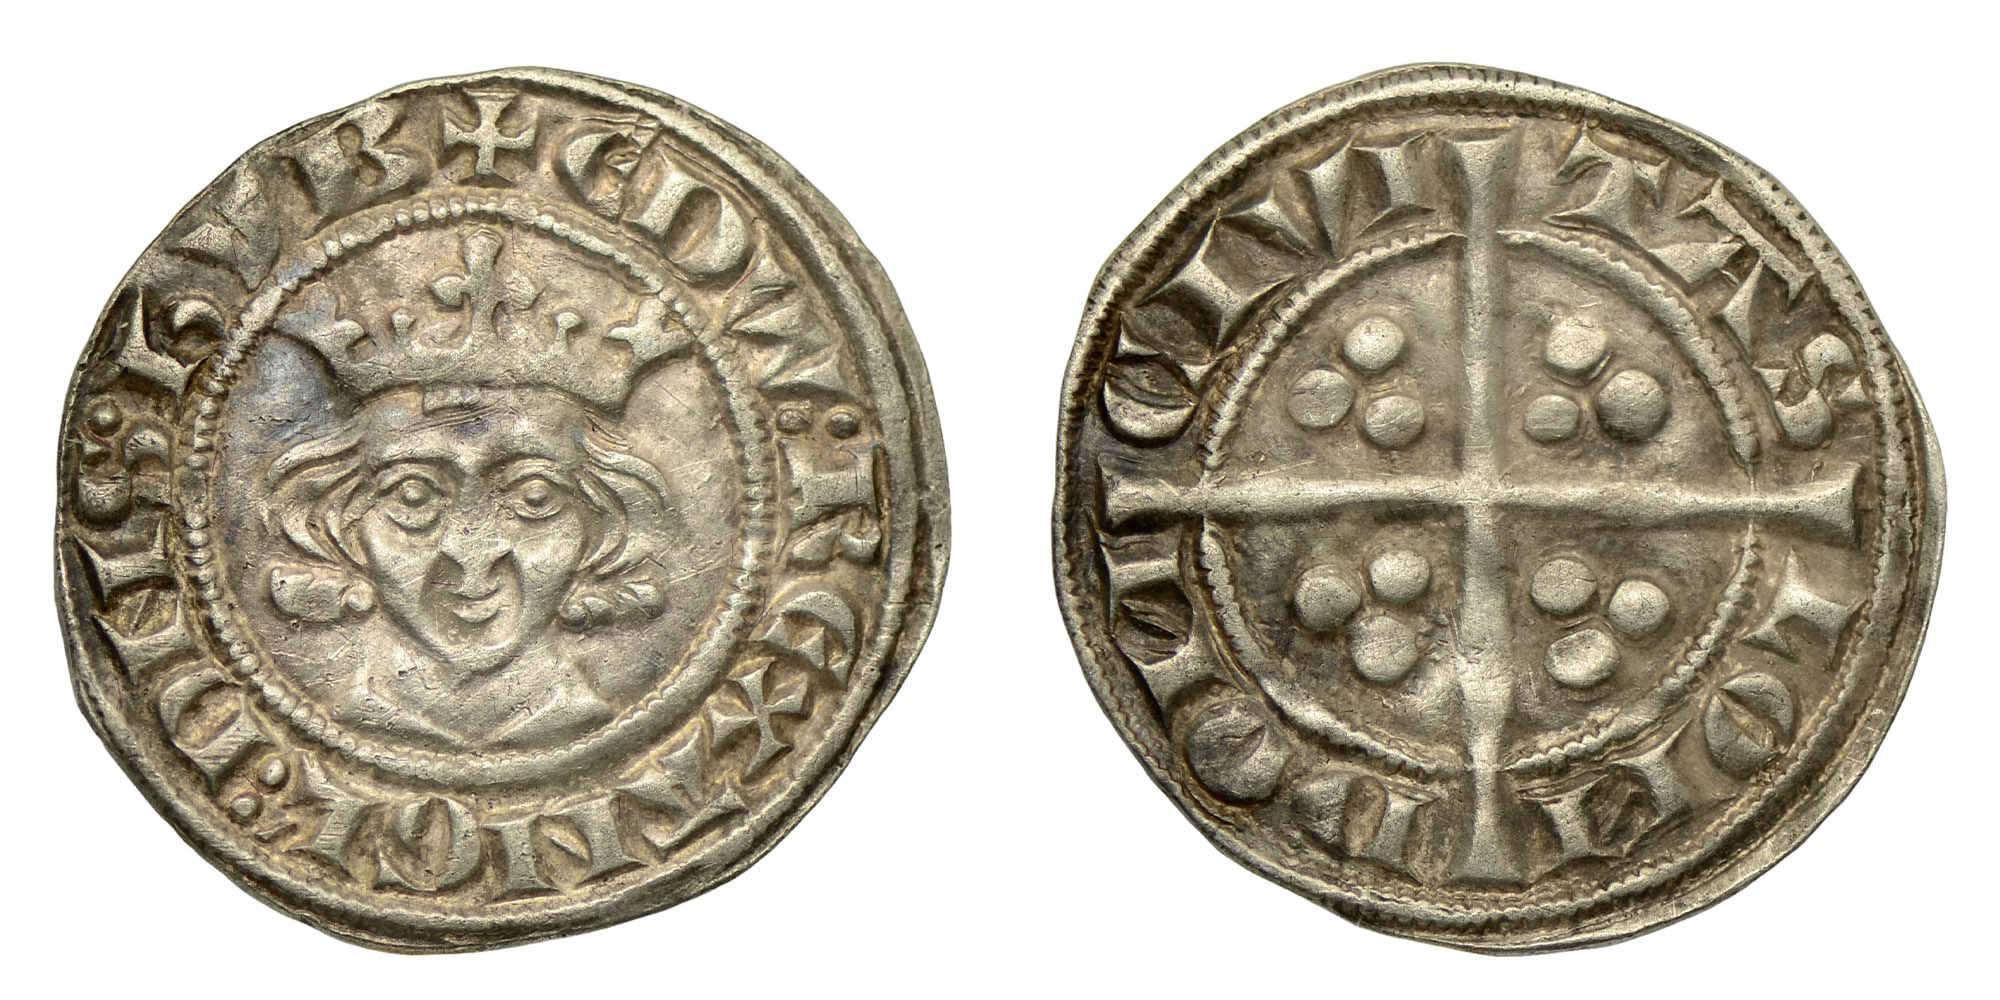 Edward I Silver Penny 1272-1307 Scarce in this condition